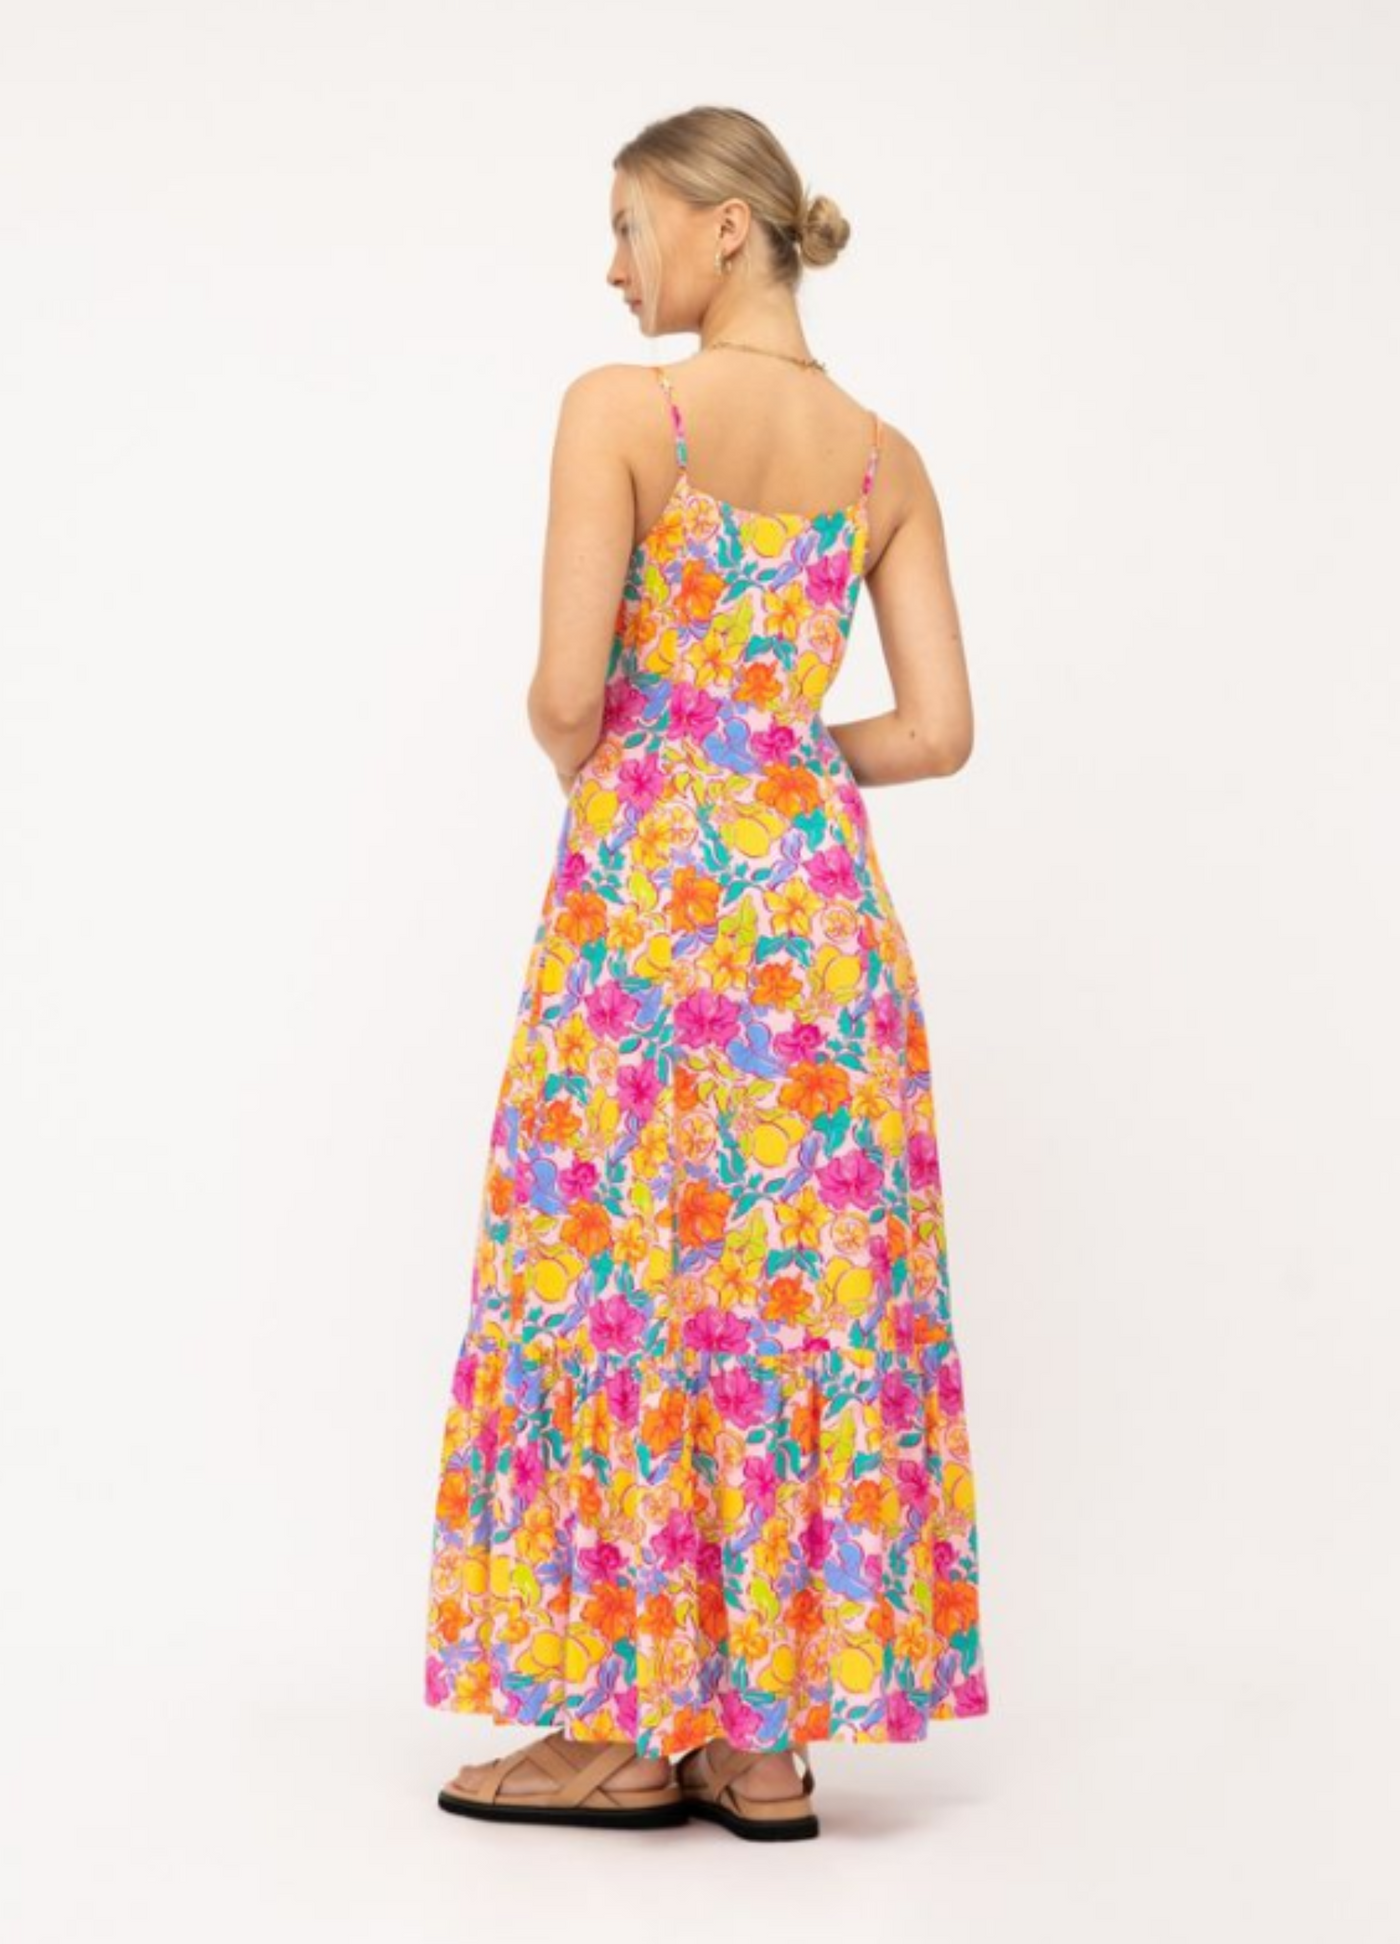 Maxi Dress Leila - floral printed strappy maxi dress with split